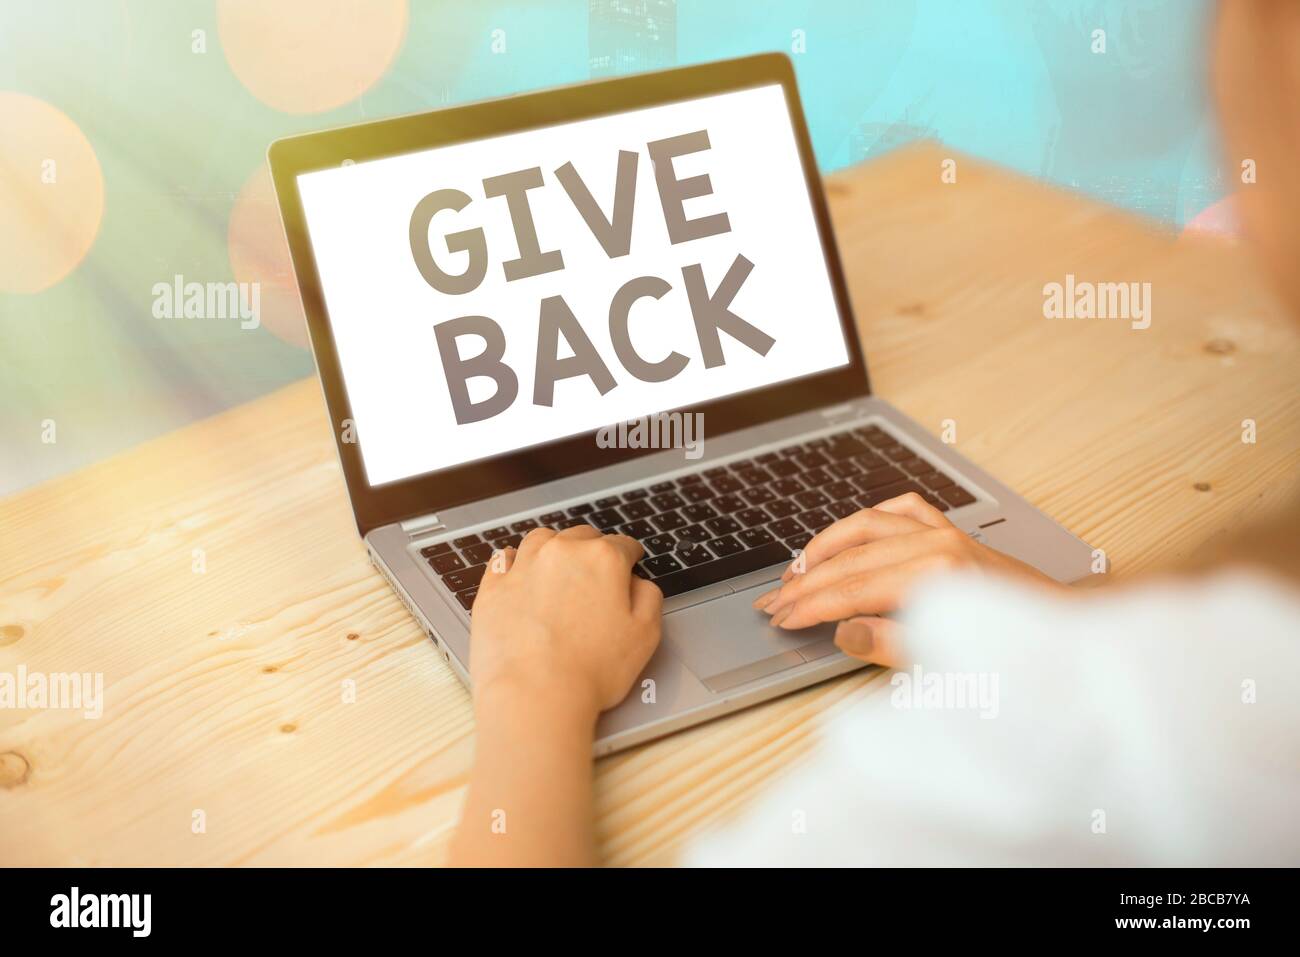 Give back meaning